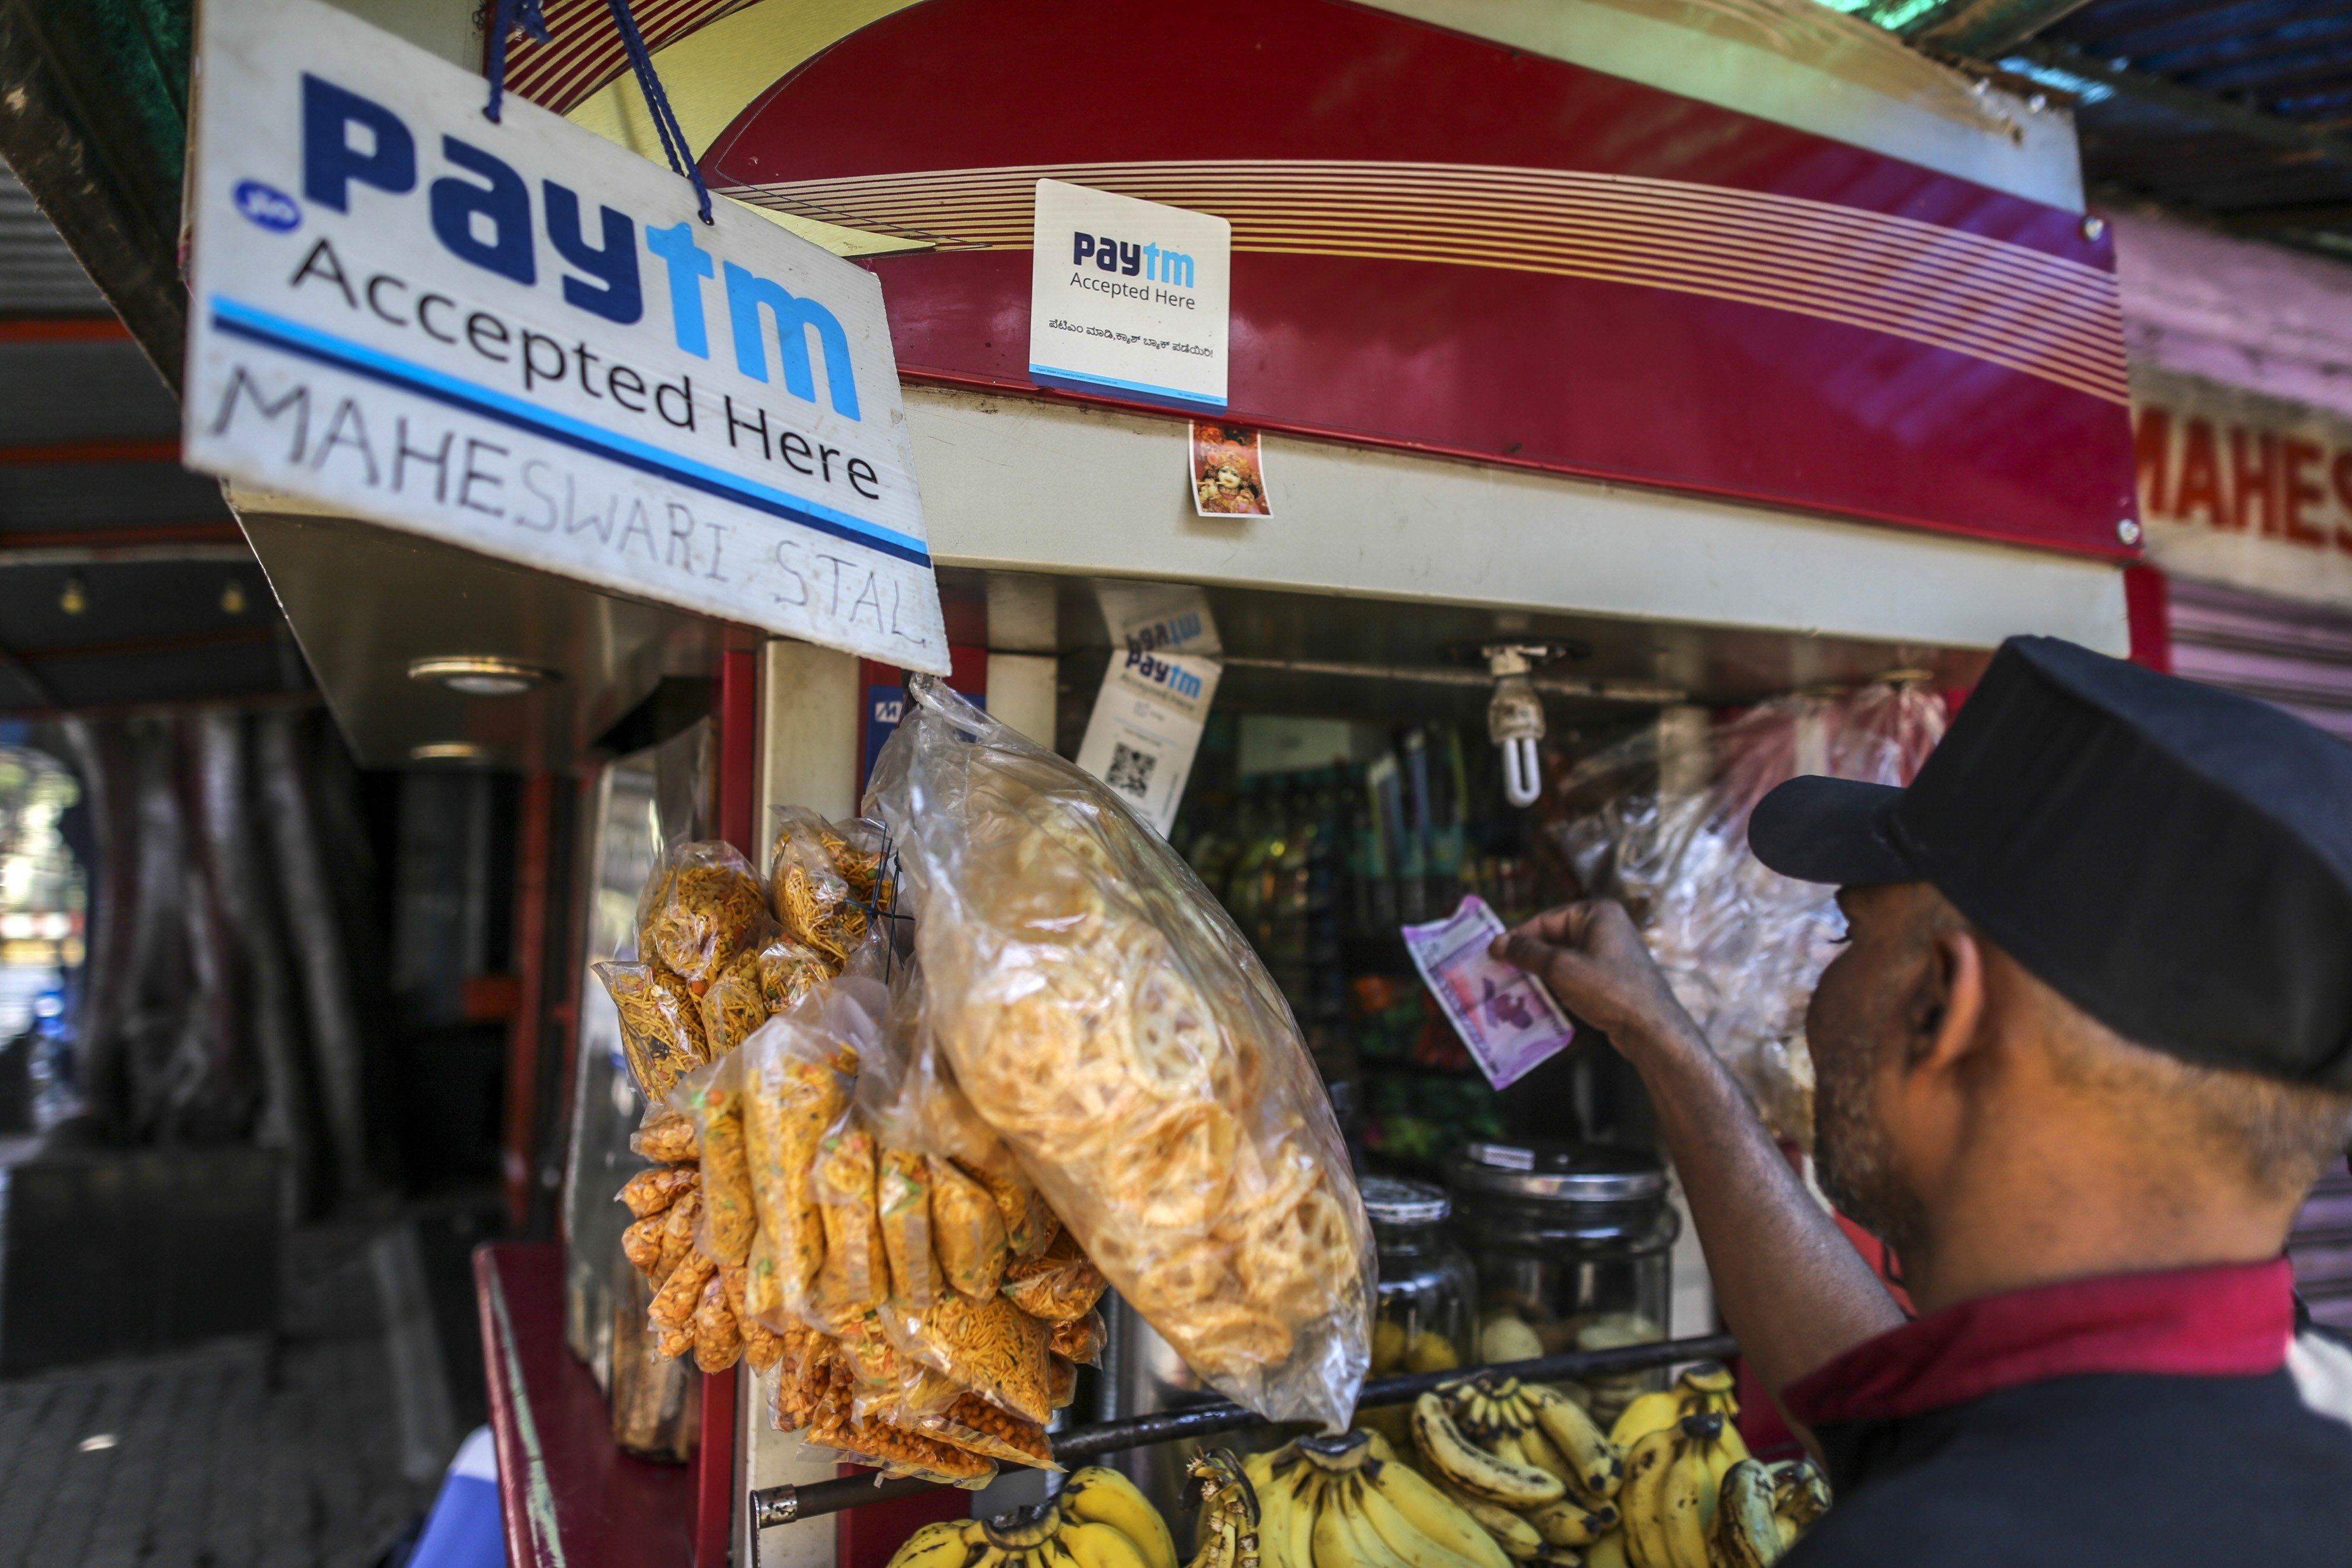 A Paytm sign at a stall selling snacks in Bangalore, India. Photo: Bloomberg